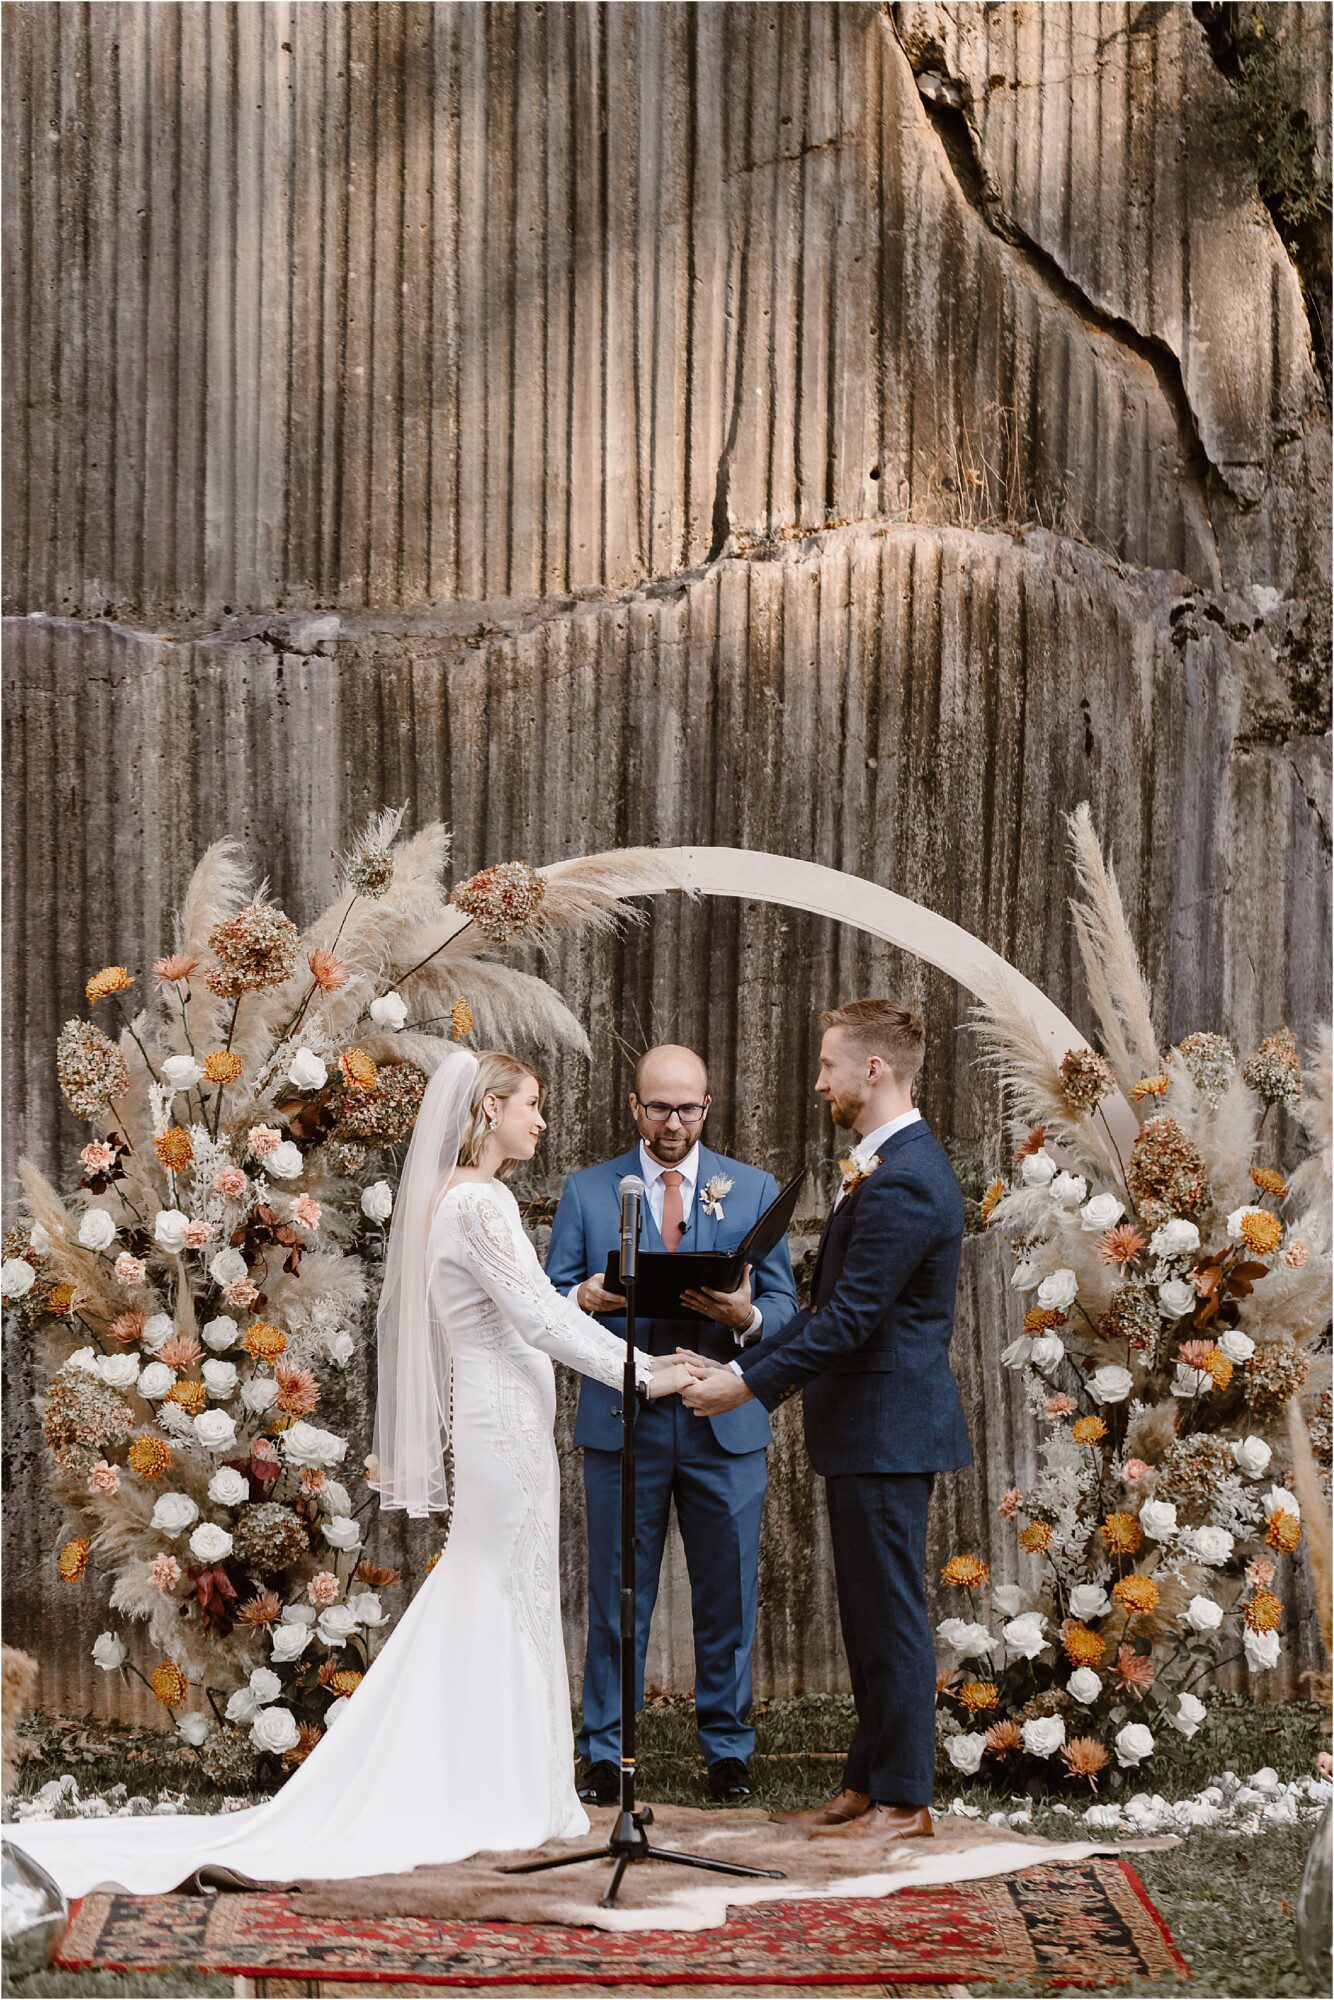 bride and groom standing in front of circular arbor at wedding ceremony surrounded by orange and cream flowers